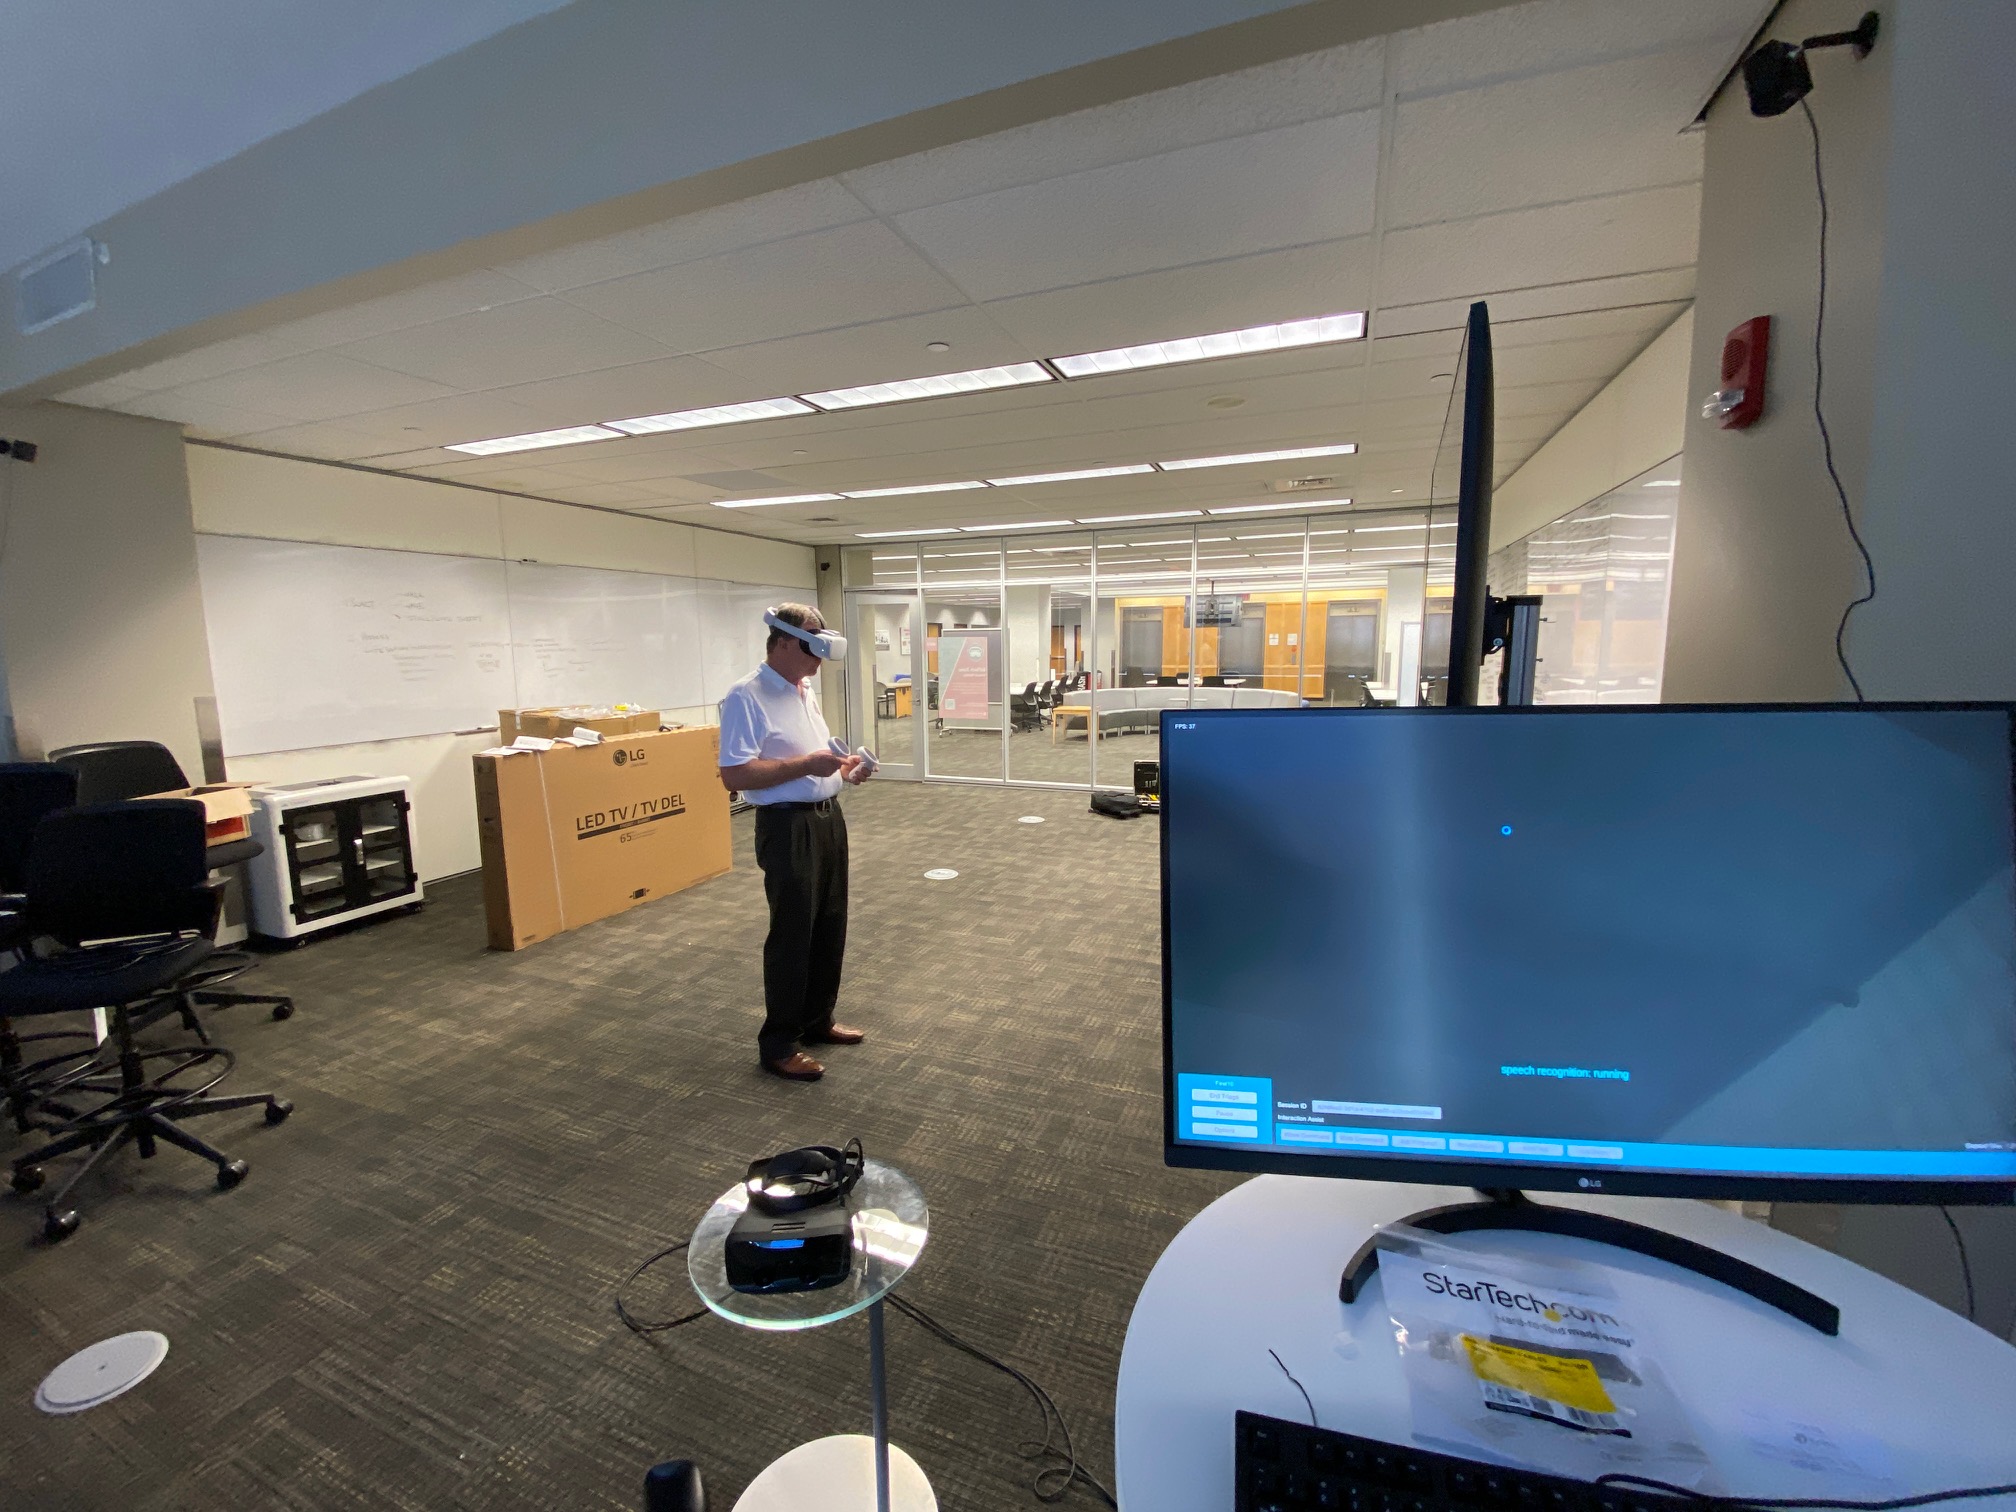 Dr. Doug Danforth from The Ohio State University College of Medicine tests a virtual reality headset in the EdTech Incubator's Virtual Reality Tech Zone.